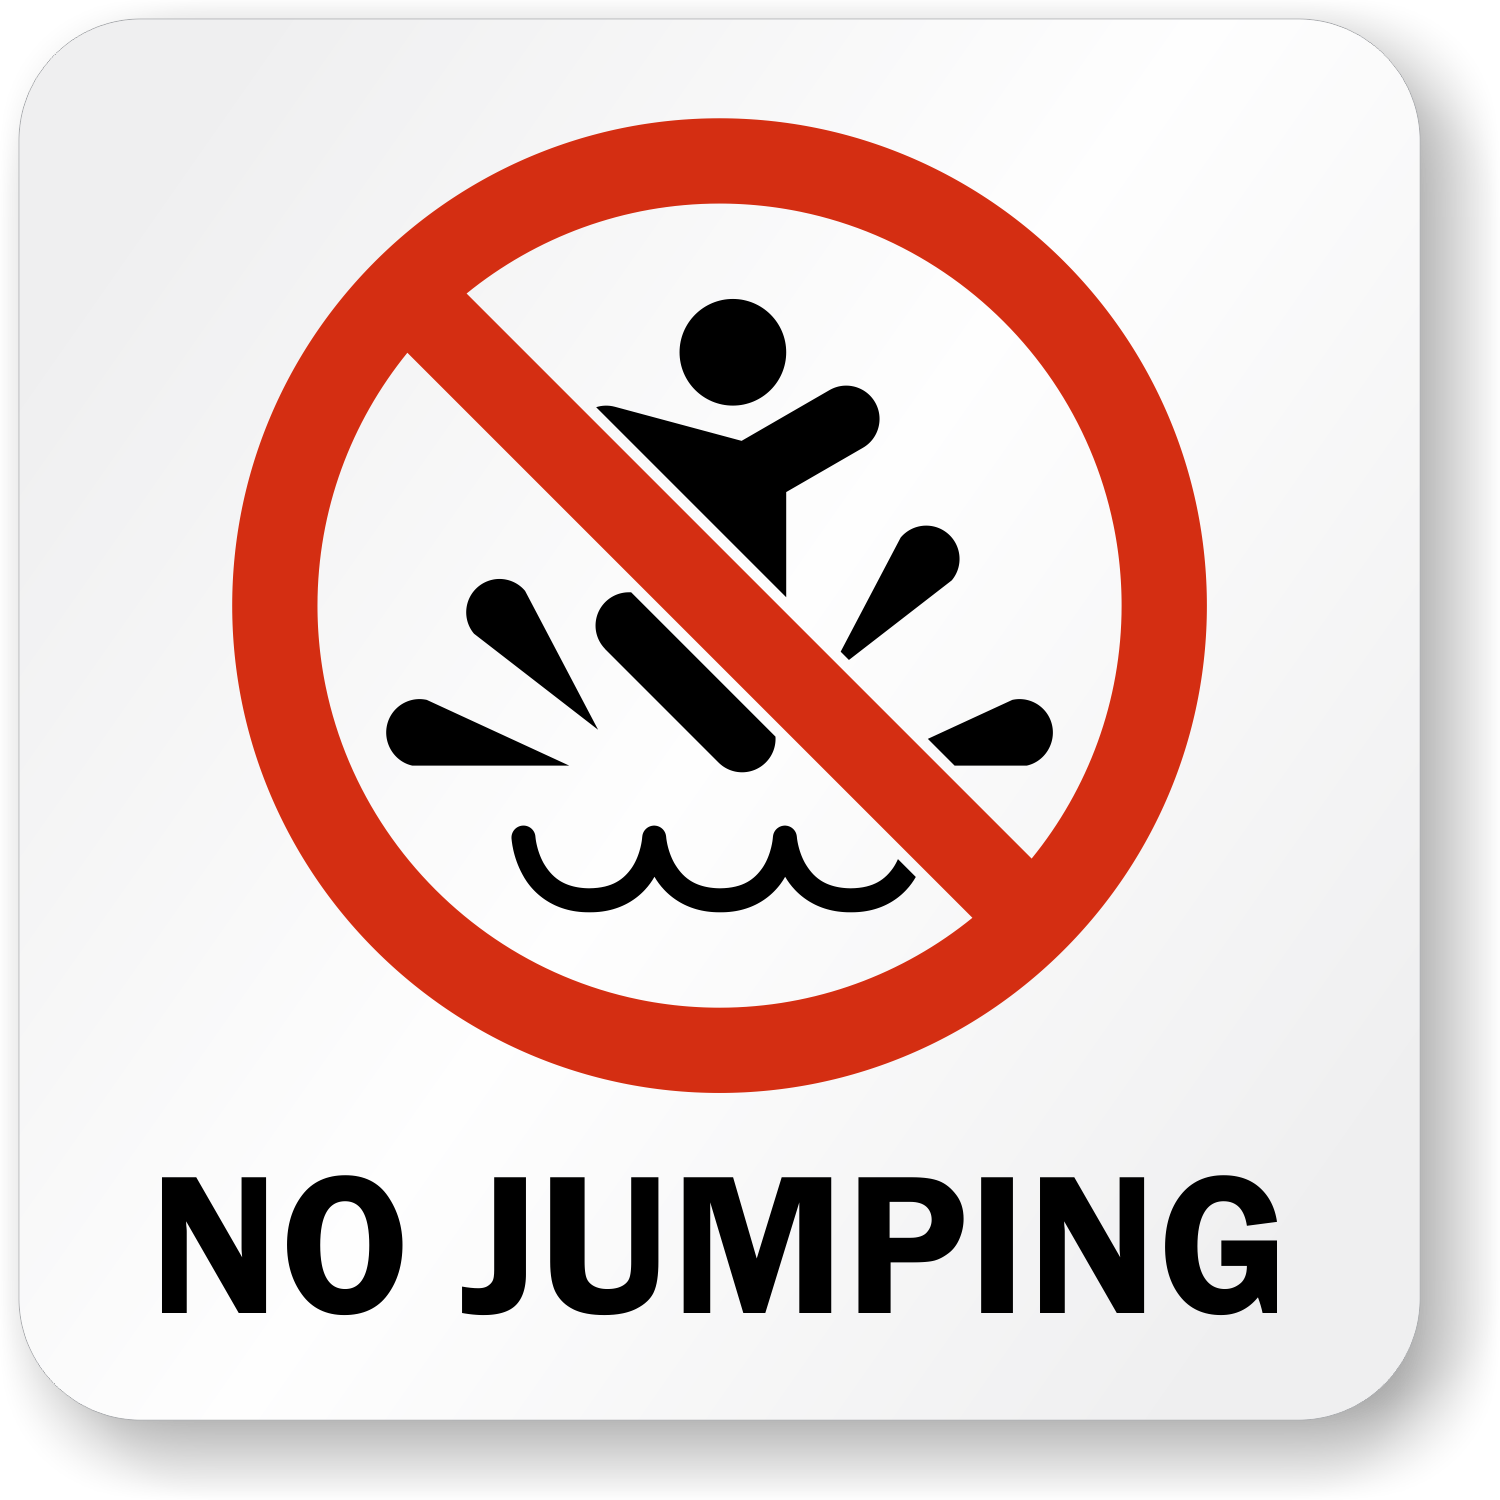 https://www.mypoolsigns.com/img/lg/M/no-jumping-pool-marker-mk-0271.png